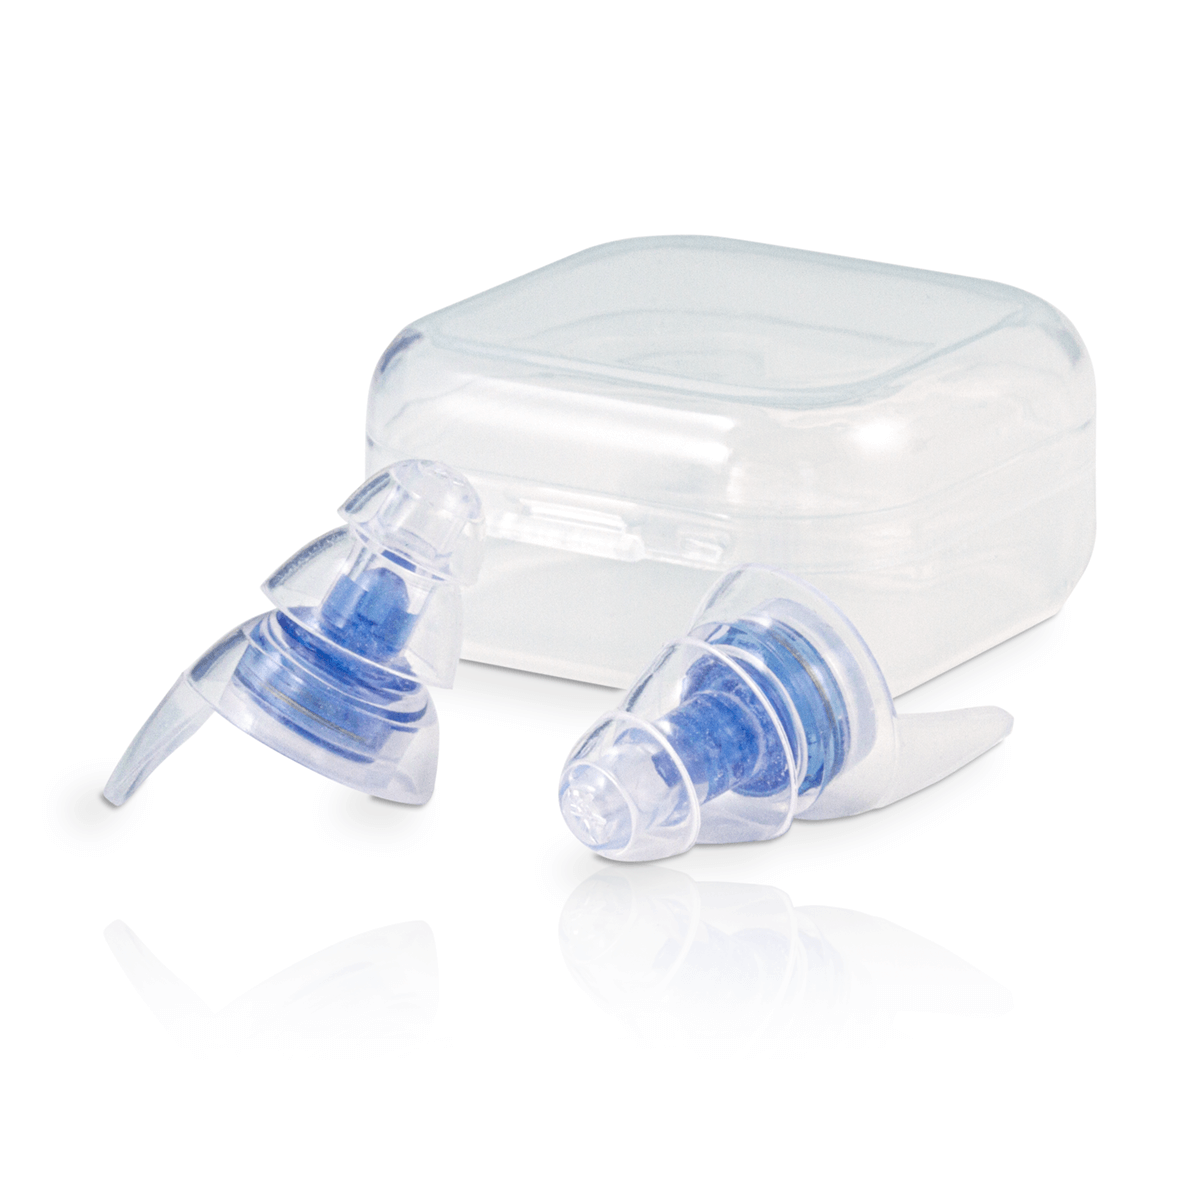  ZQuiet flex-fit replacement earplugs product image